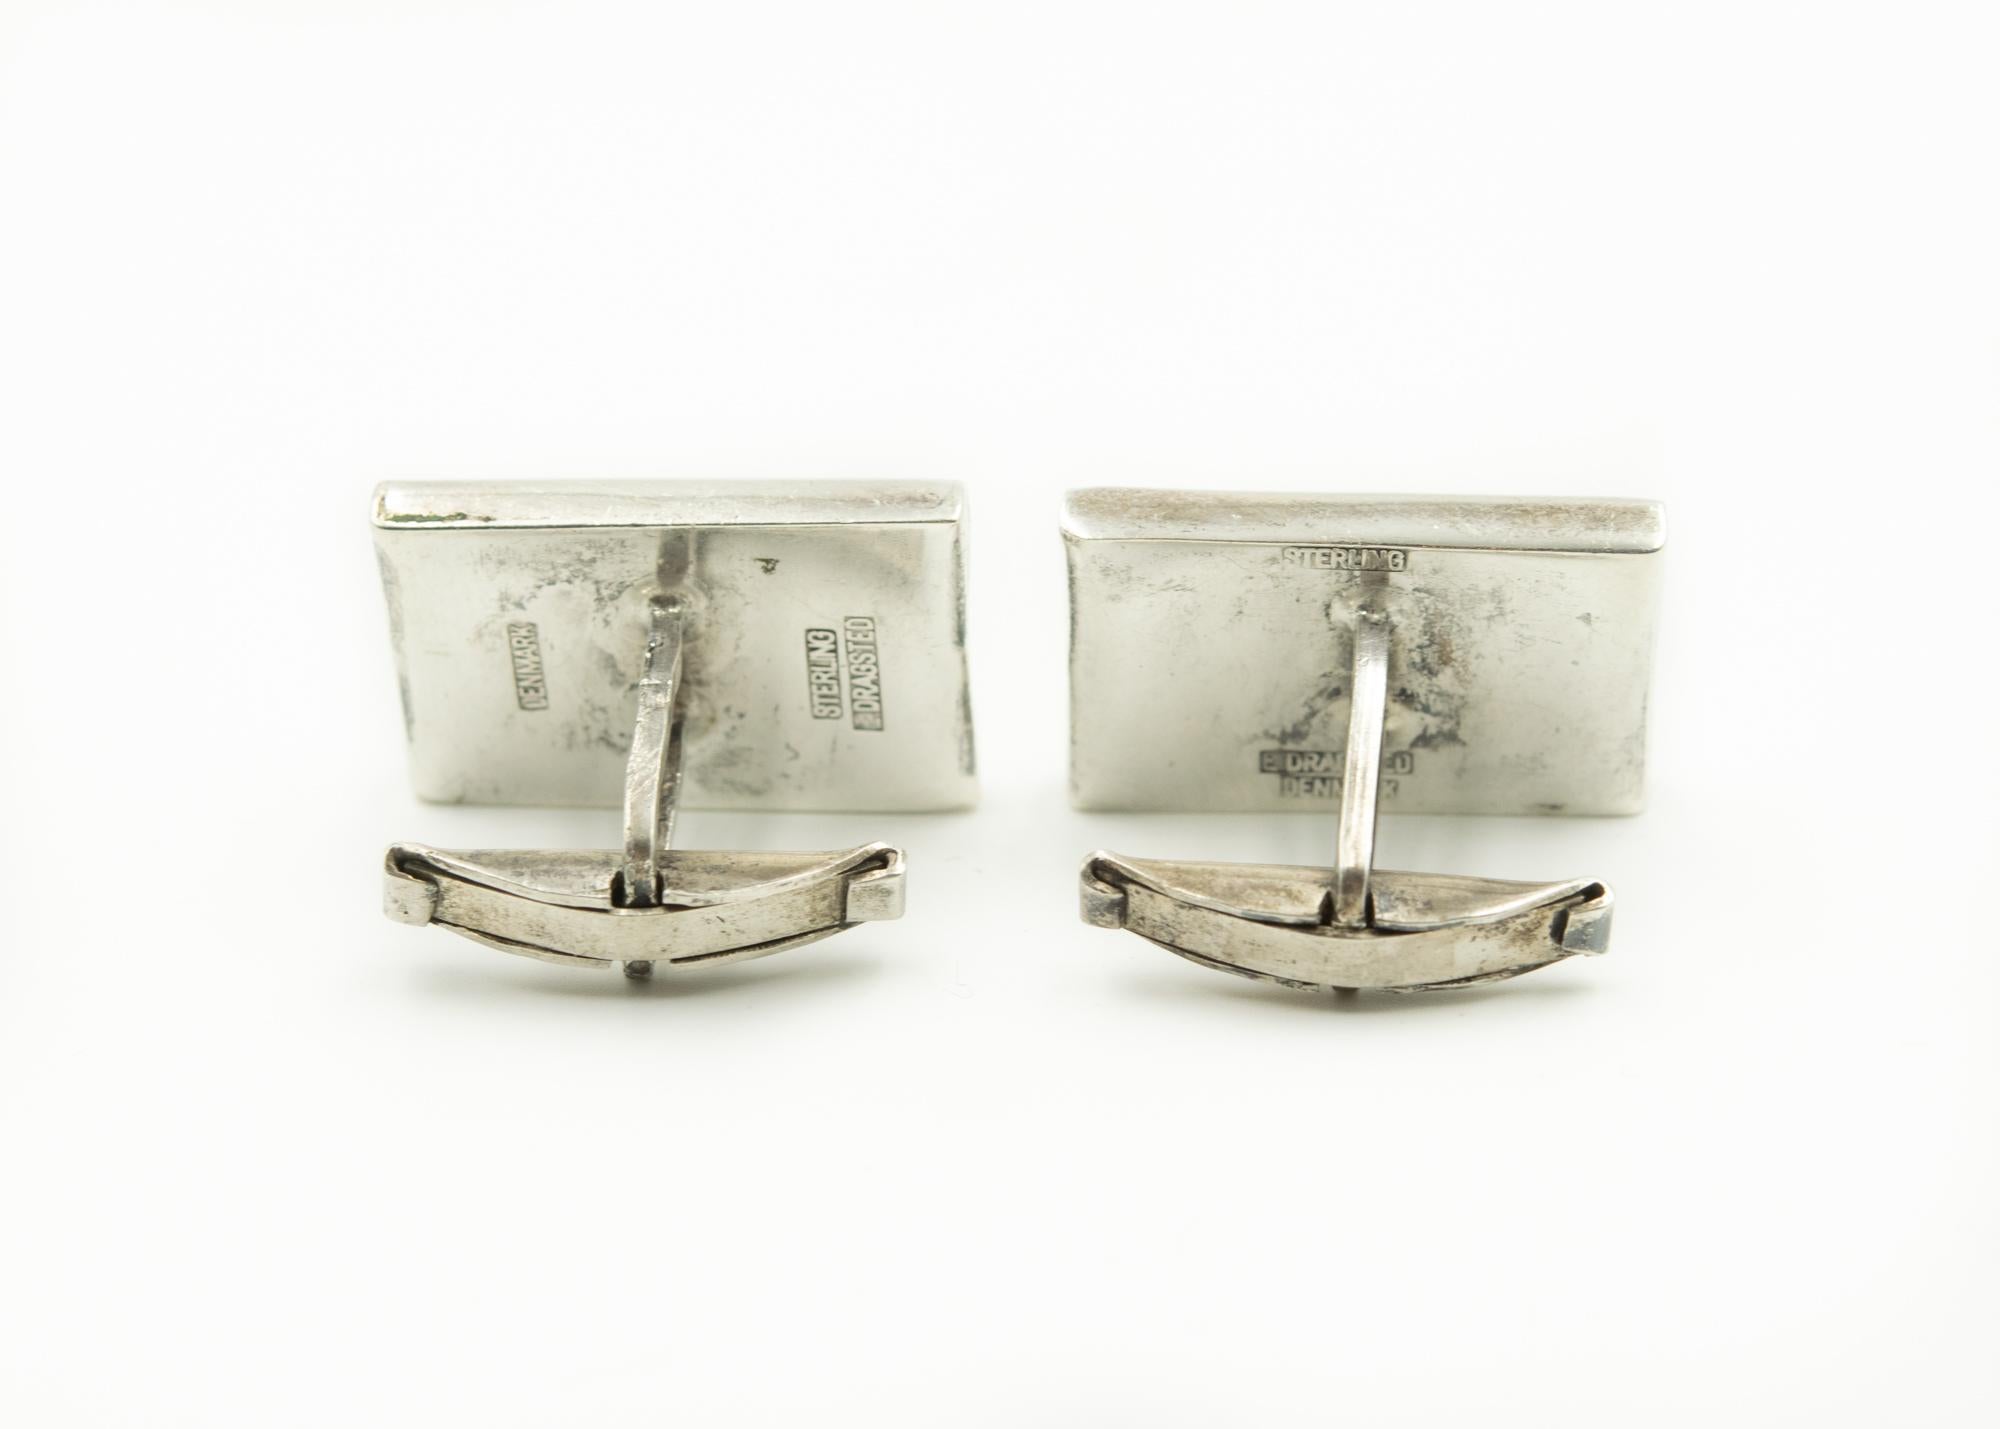 Mid 20th century modern cufflinks made by Danish silversmith E. Dragsted.  These elegant rectangular sterling silver cufflinks resemble a wave.  They have a whale tail back.

E. DRAGSTED
Dragsted had a workshop in Copenhagen 1948-1958.